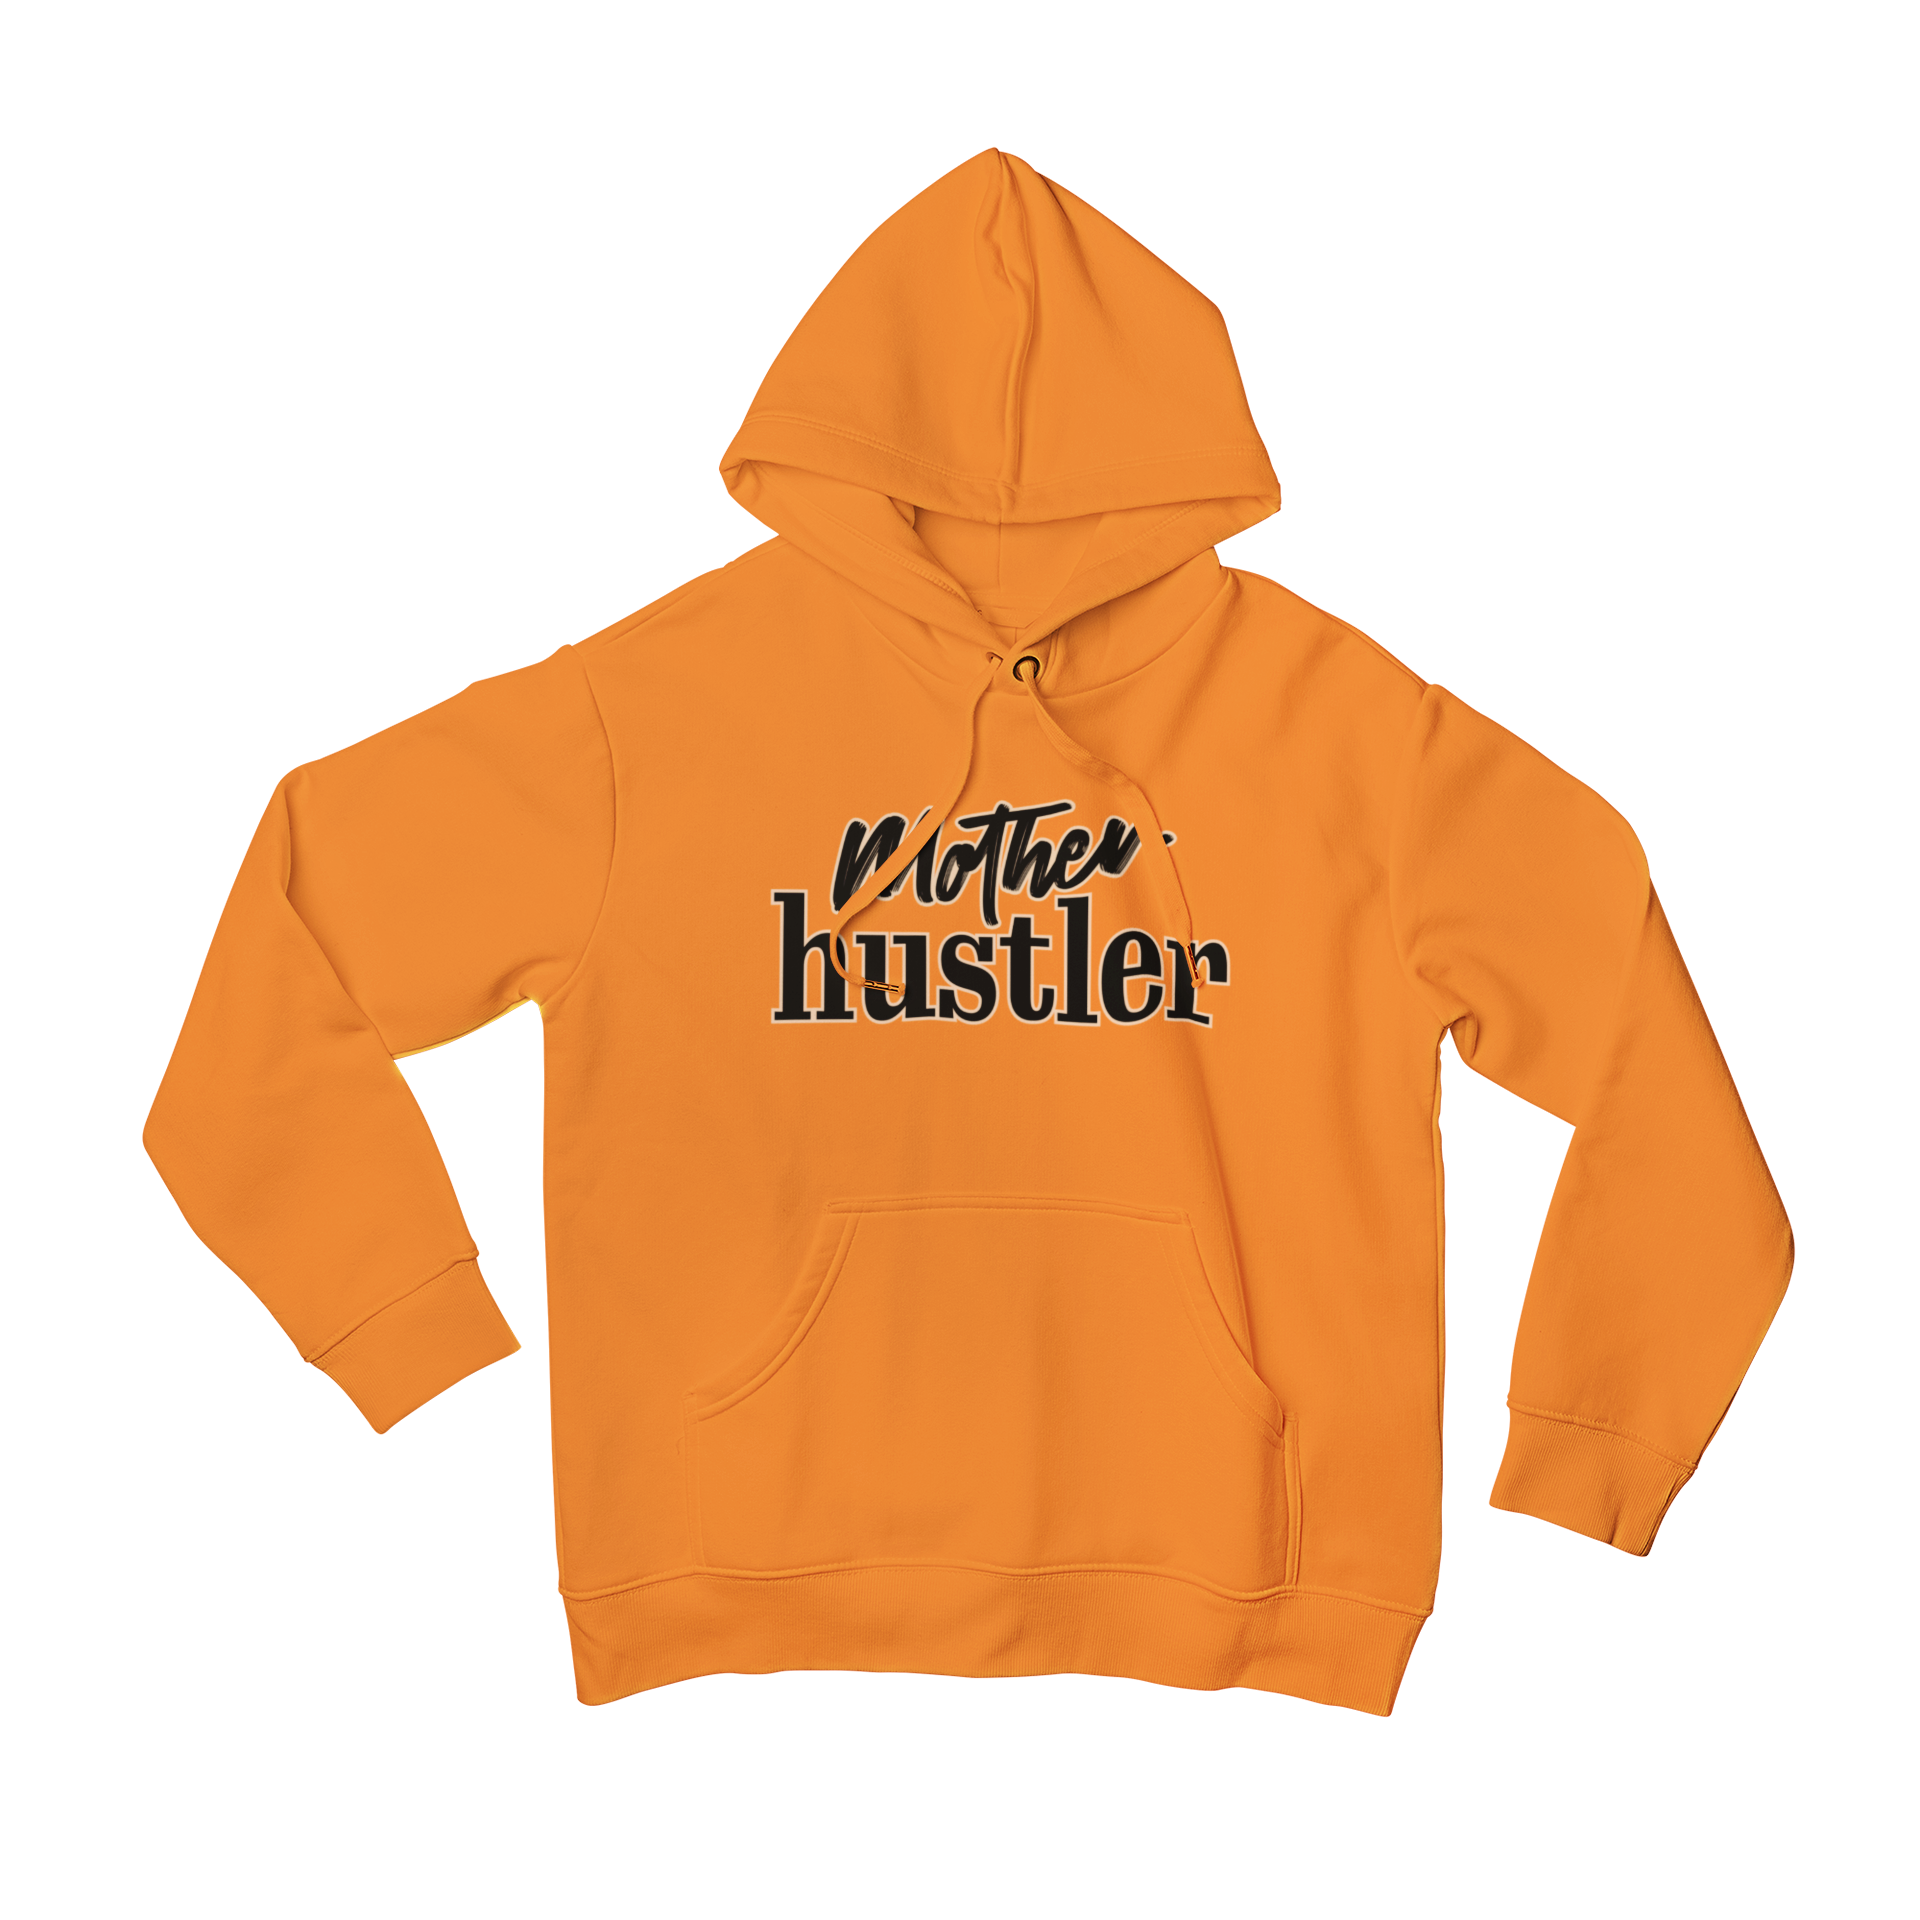 Get your hands on the latest "Mother Hustler" slogan hoodie from teevolution. This warm and comfortable hoodie is perfect for everyday wear, and the front print will make you stand out from the crowd. Shop teevolution today and join the Mother Hustler movement!